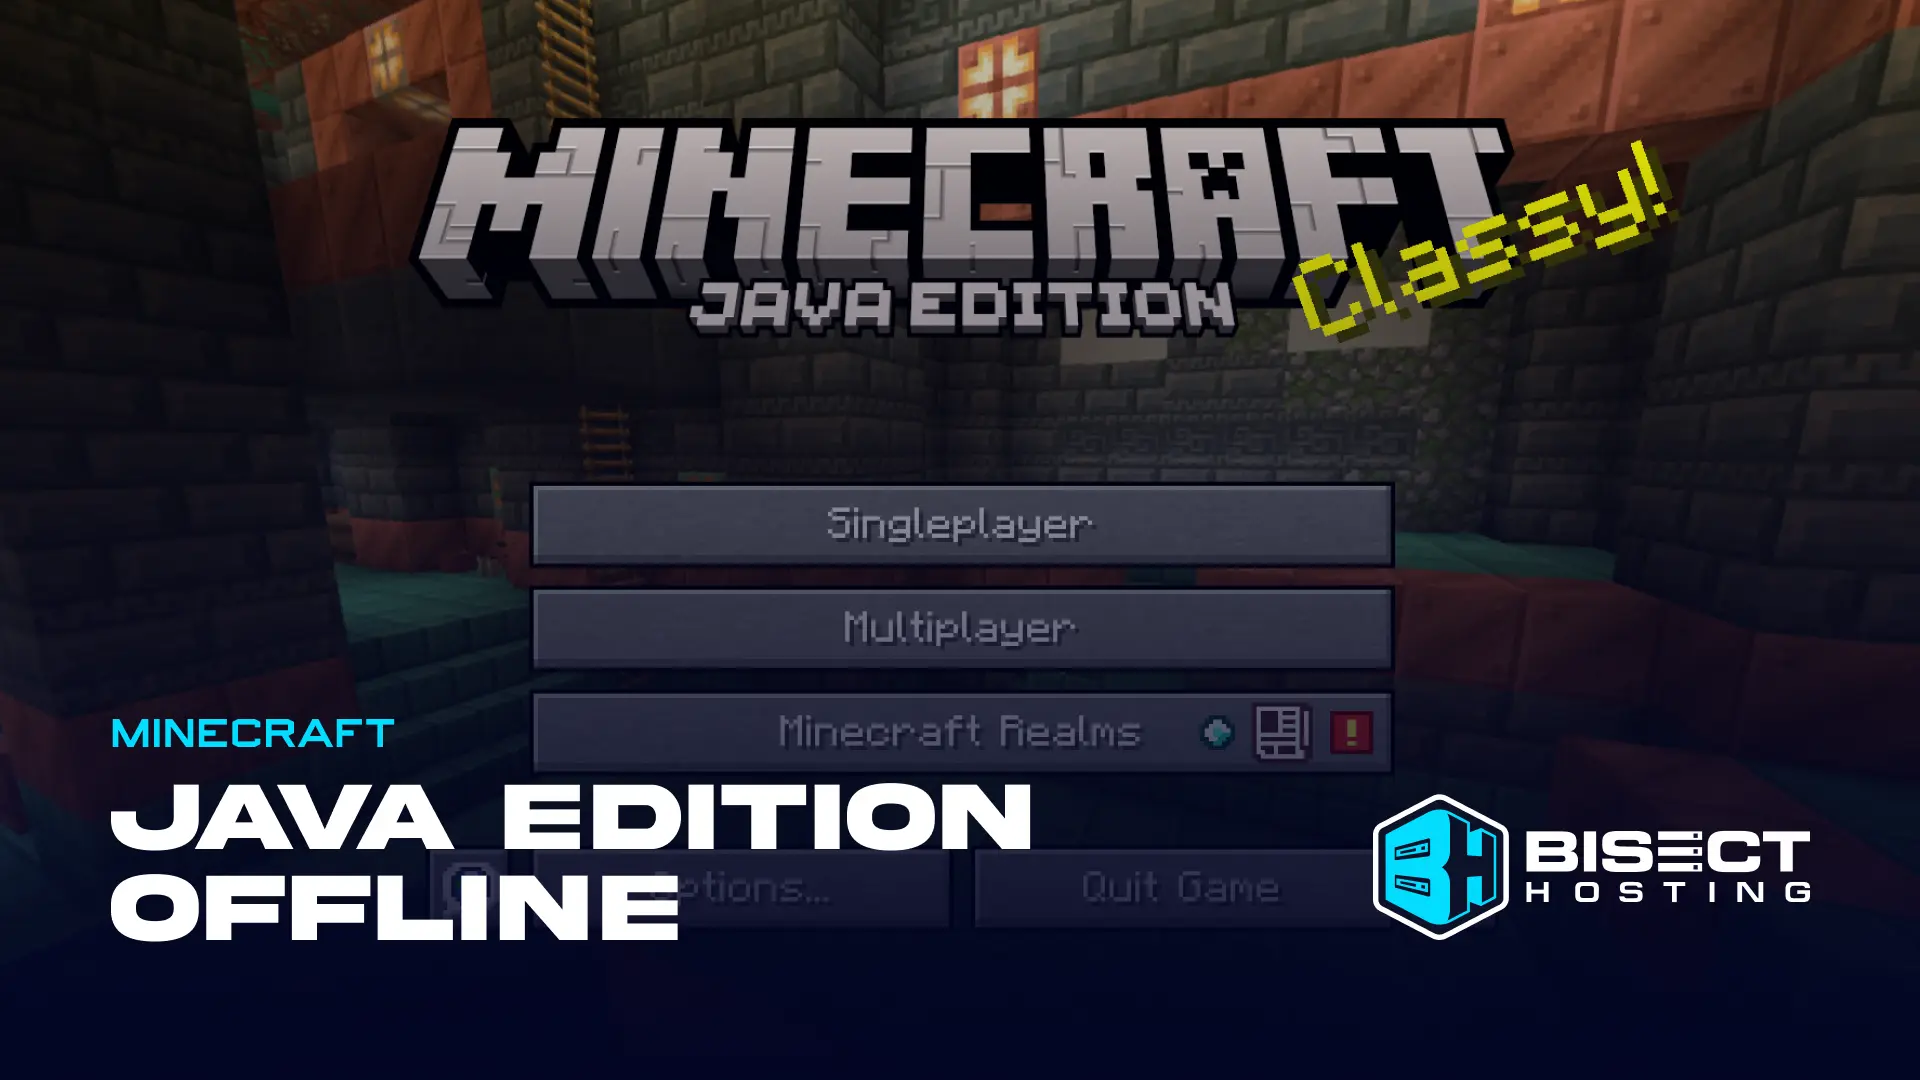 How to Play Minecraft Java Edition Offline